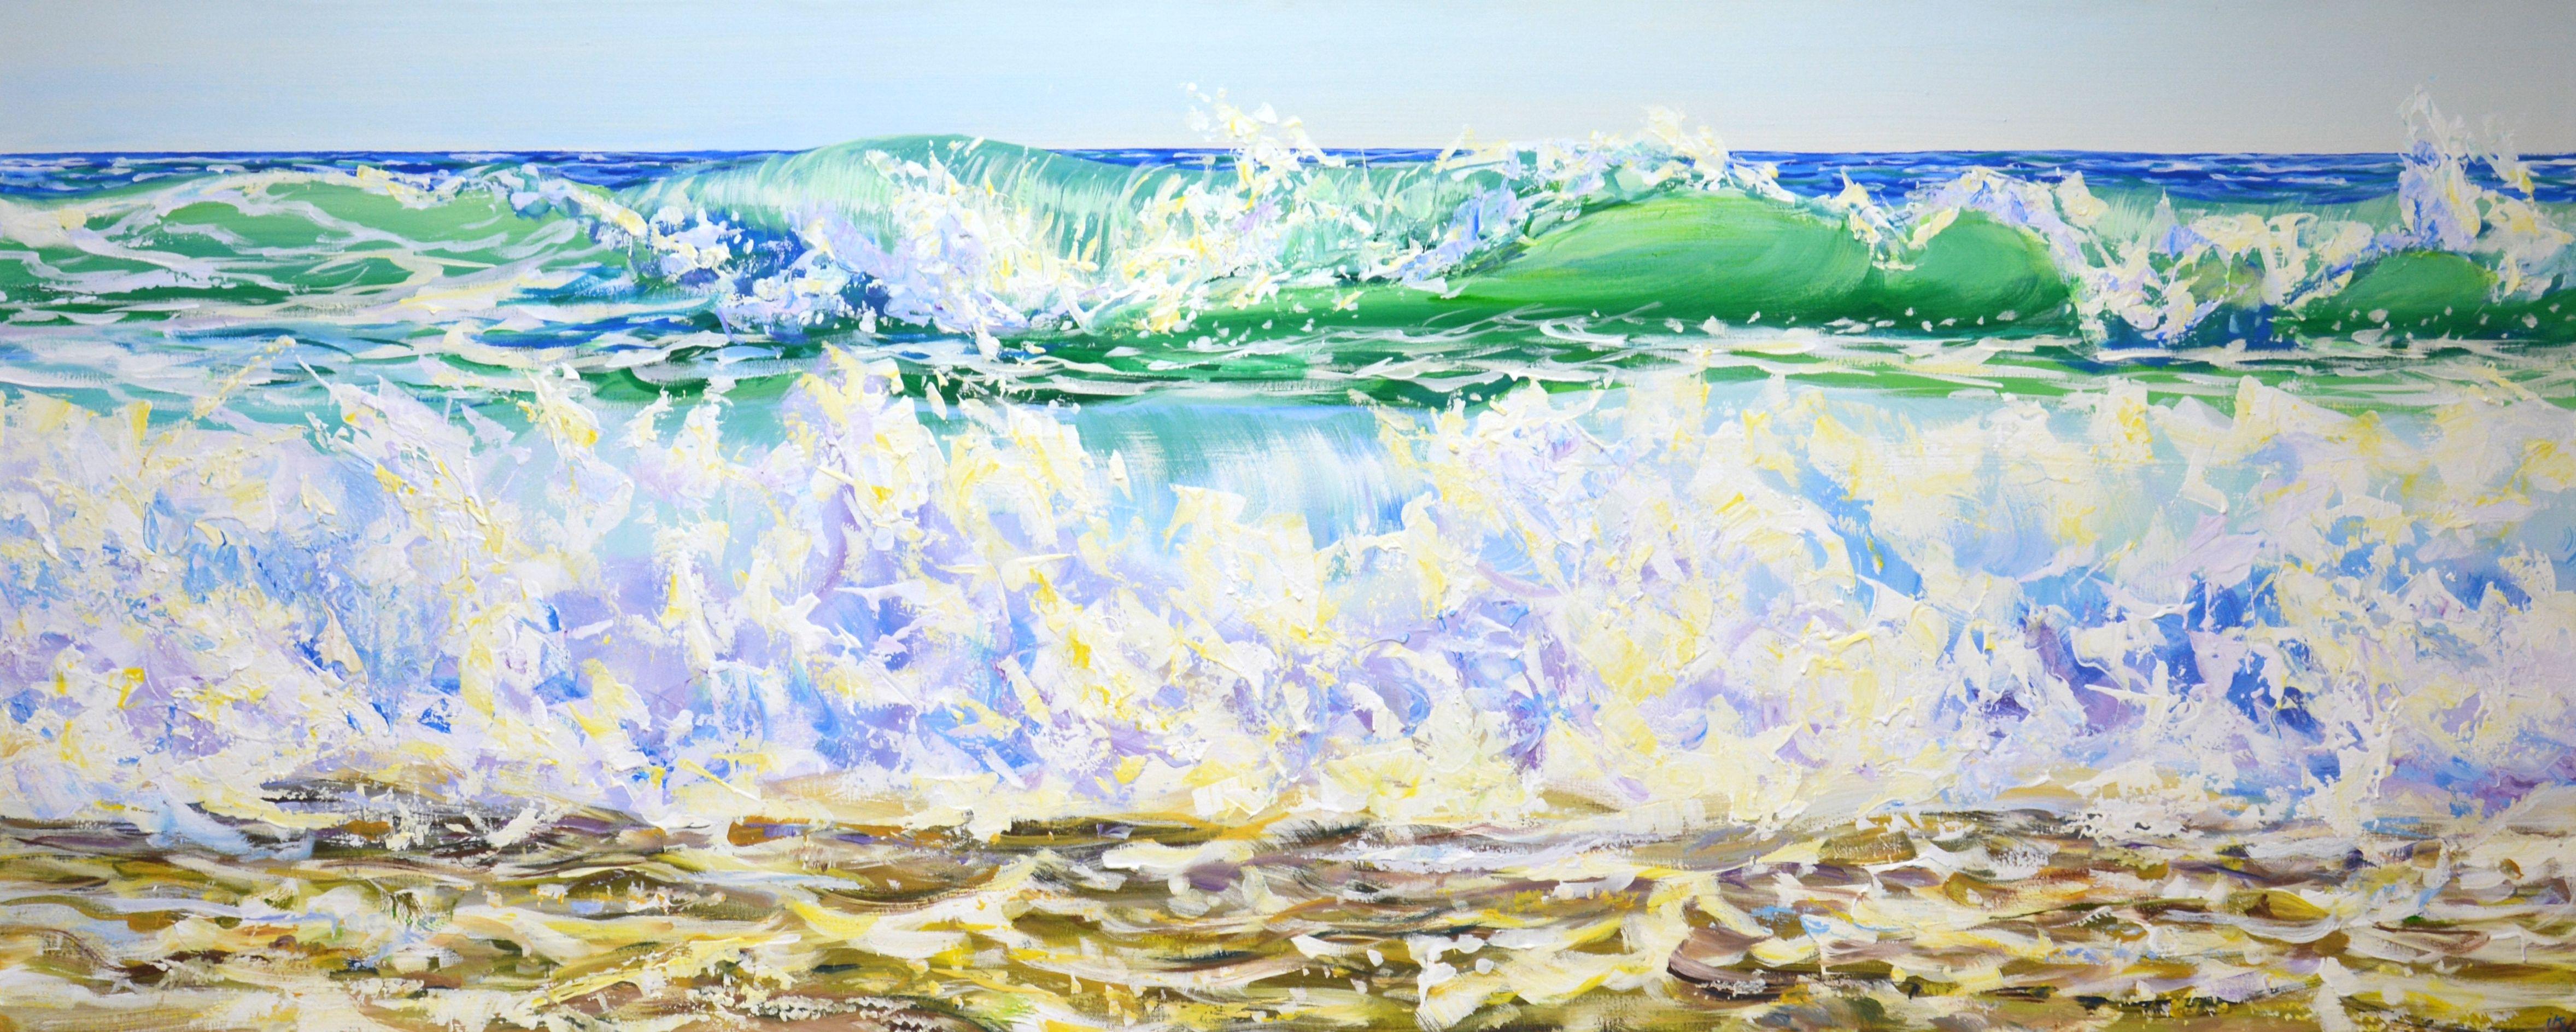 Waves of the ocean 3. The work is written with inspiration, positively. Nature: seascape, clear sky over the ocean, light reflected by oncoming waves, sun glare on the water, sea foam, relaxation atmosphere. A rich palette of blue, green, white